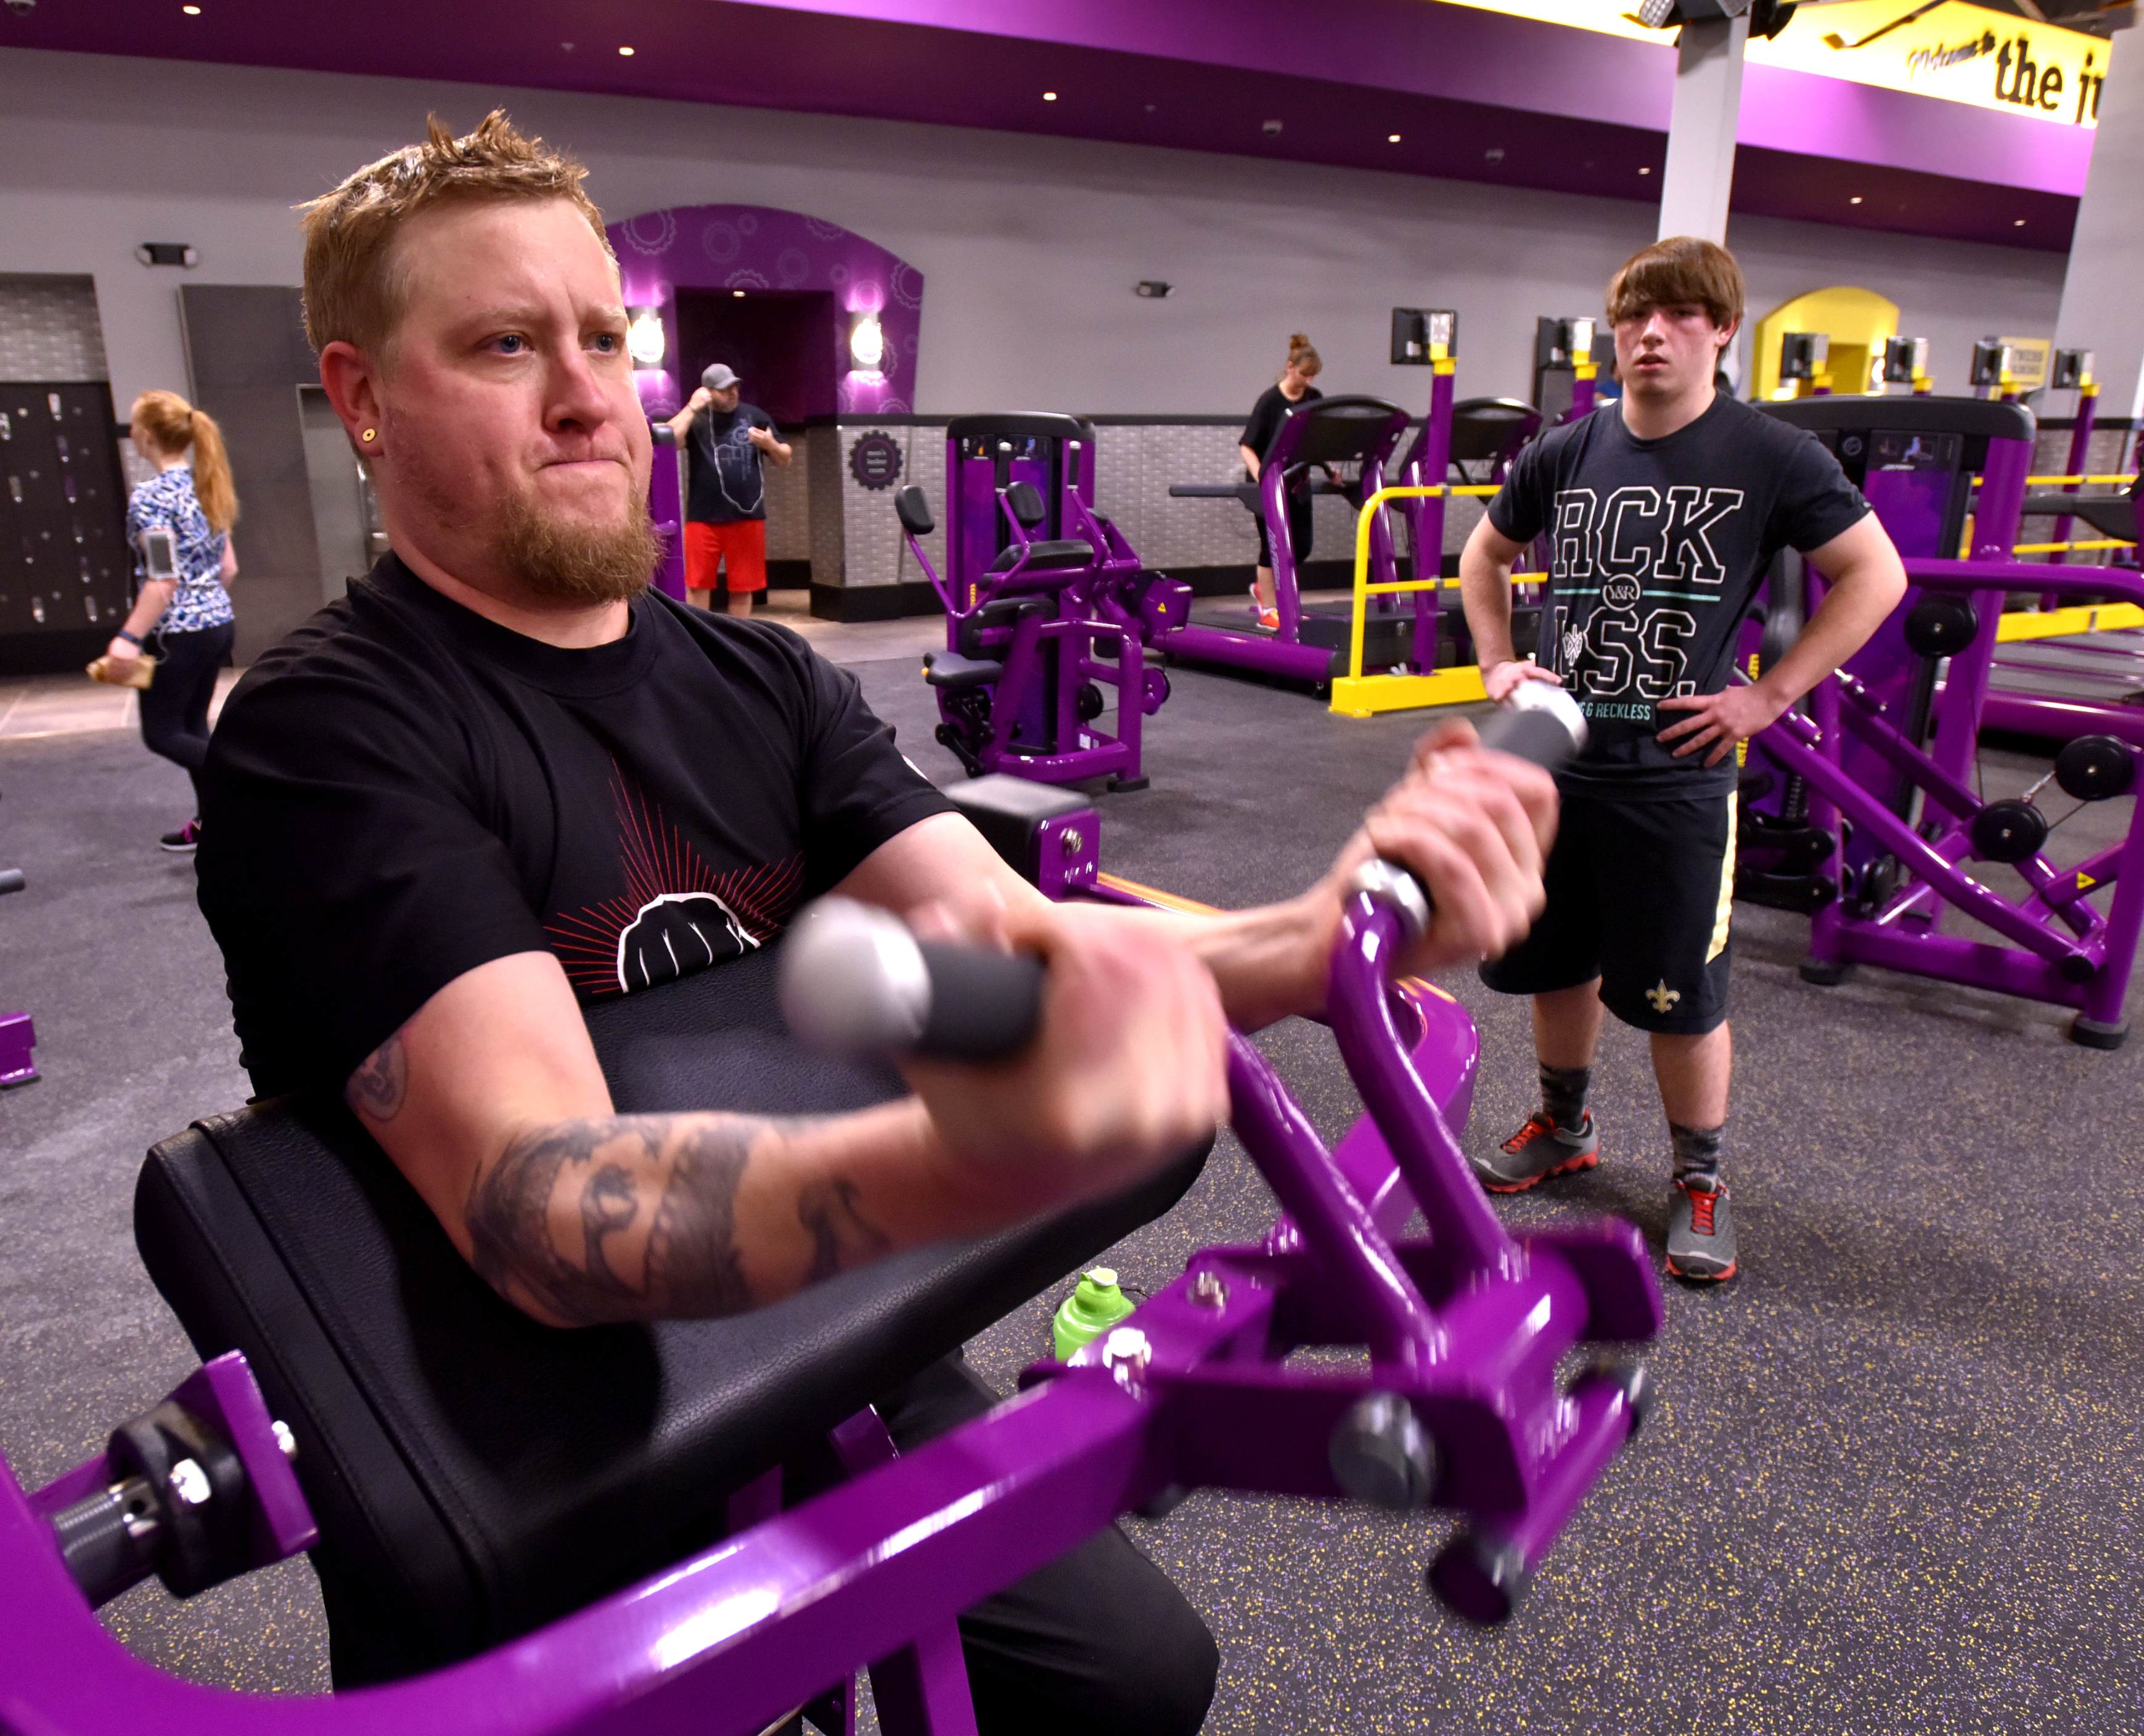 Planet Fitness offering free workouts for area teens